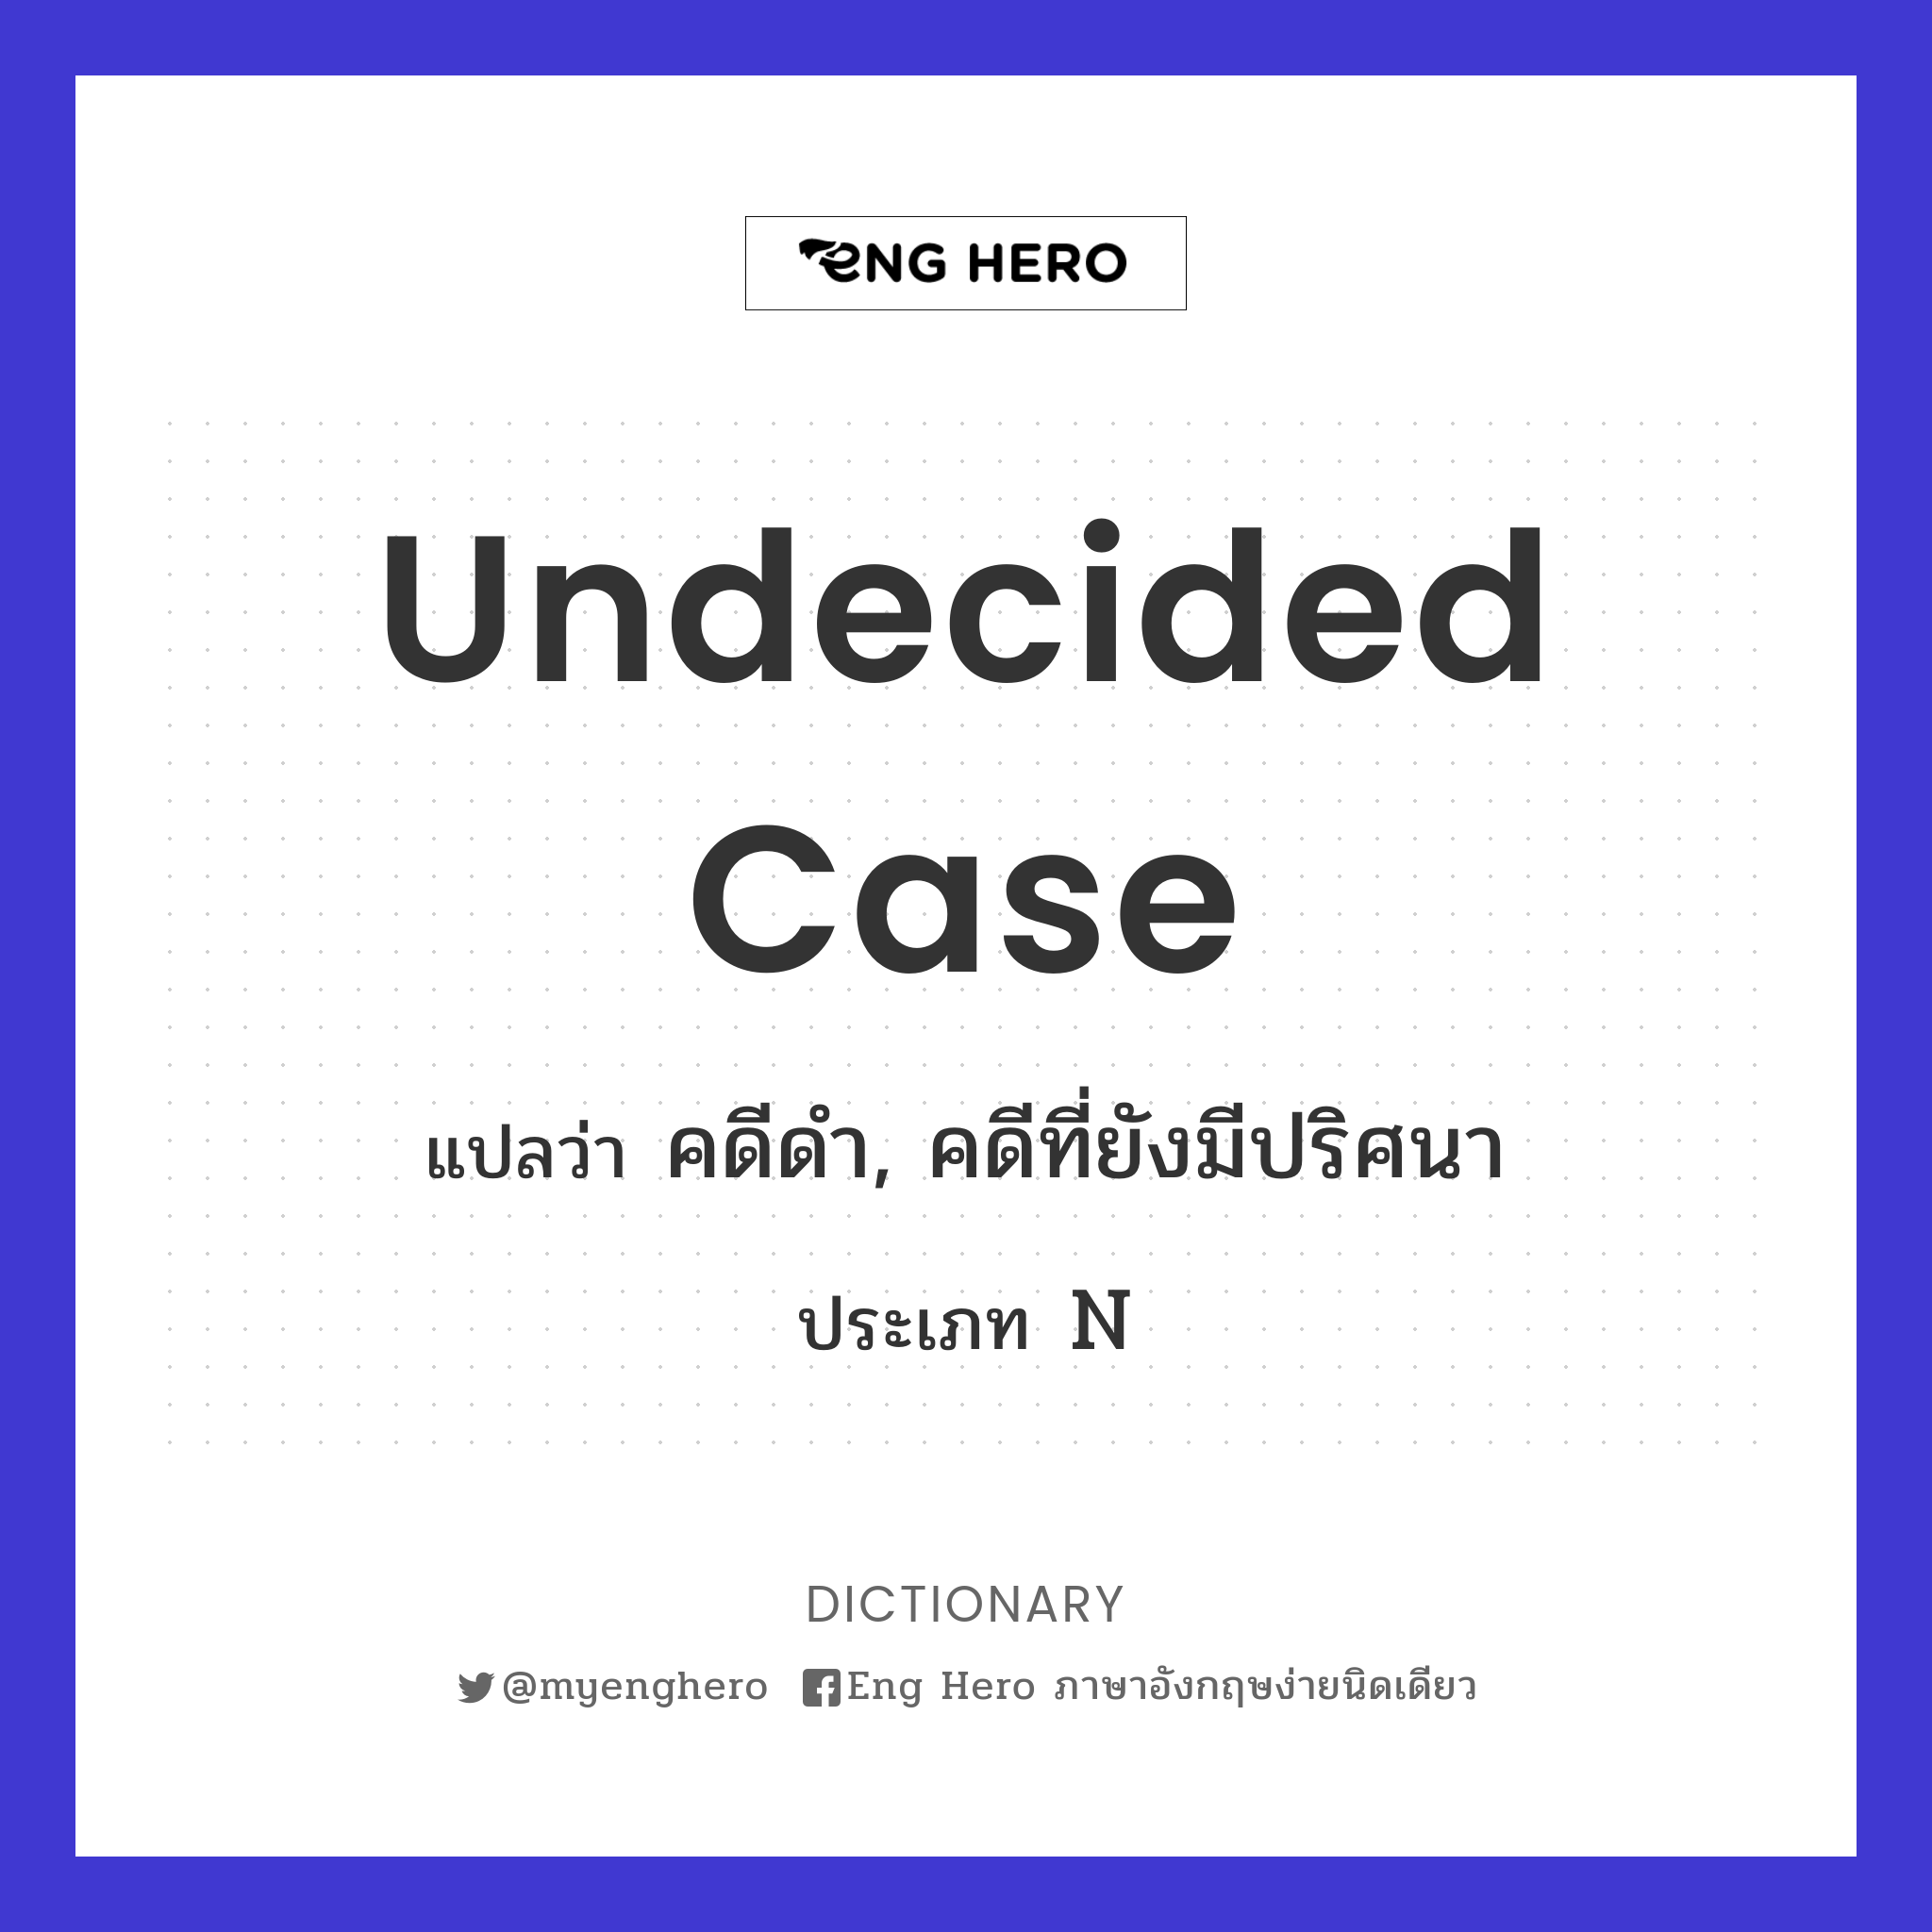 undecided case